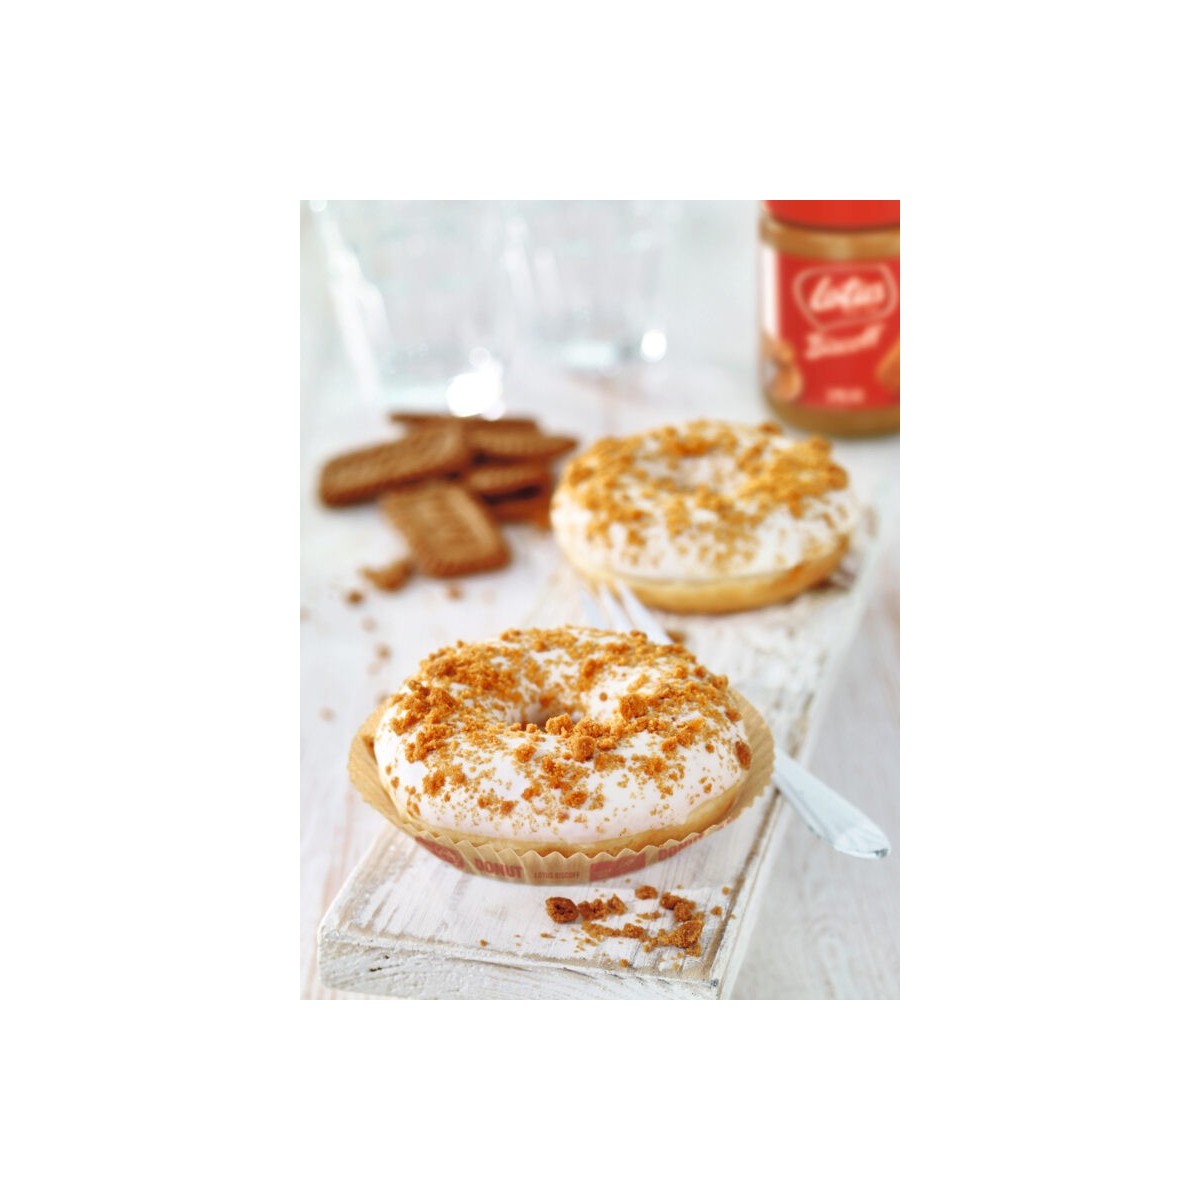 VAMIX P1603 - 48347 DONUTS FOURRE LOTUS SPECULOOS  36X71GR